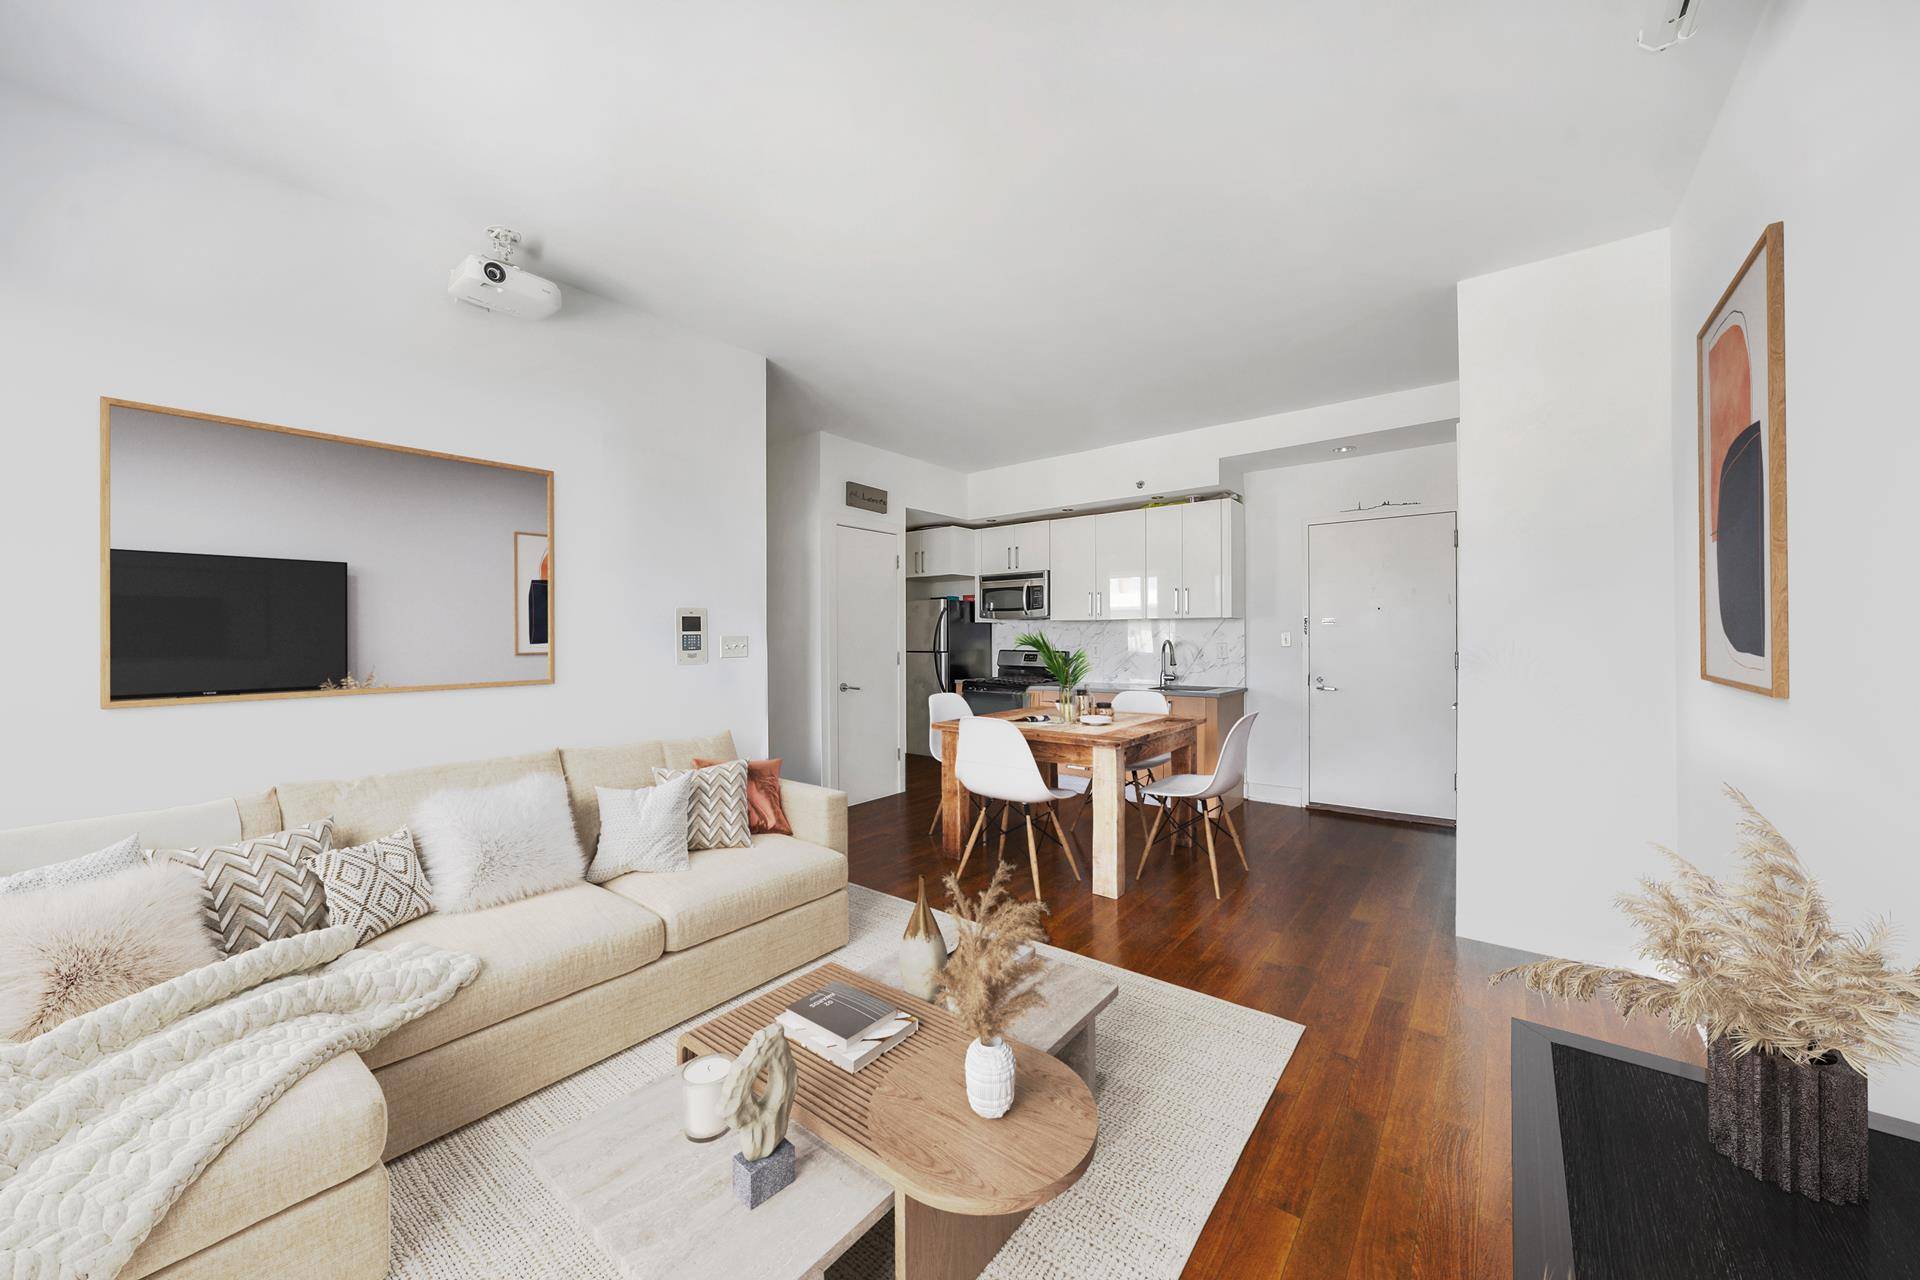 SUN DRENCHED Top Floor TRUE Two Bedroom Two Bathroom home with 2 Private Terraces located in one of the only Full Service Luxury Doorman Buildings in East Williamsburg.